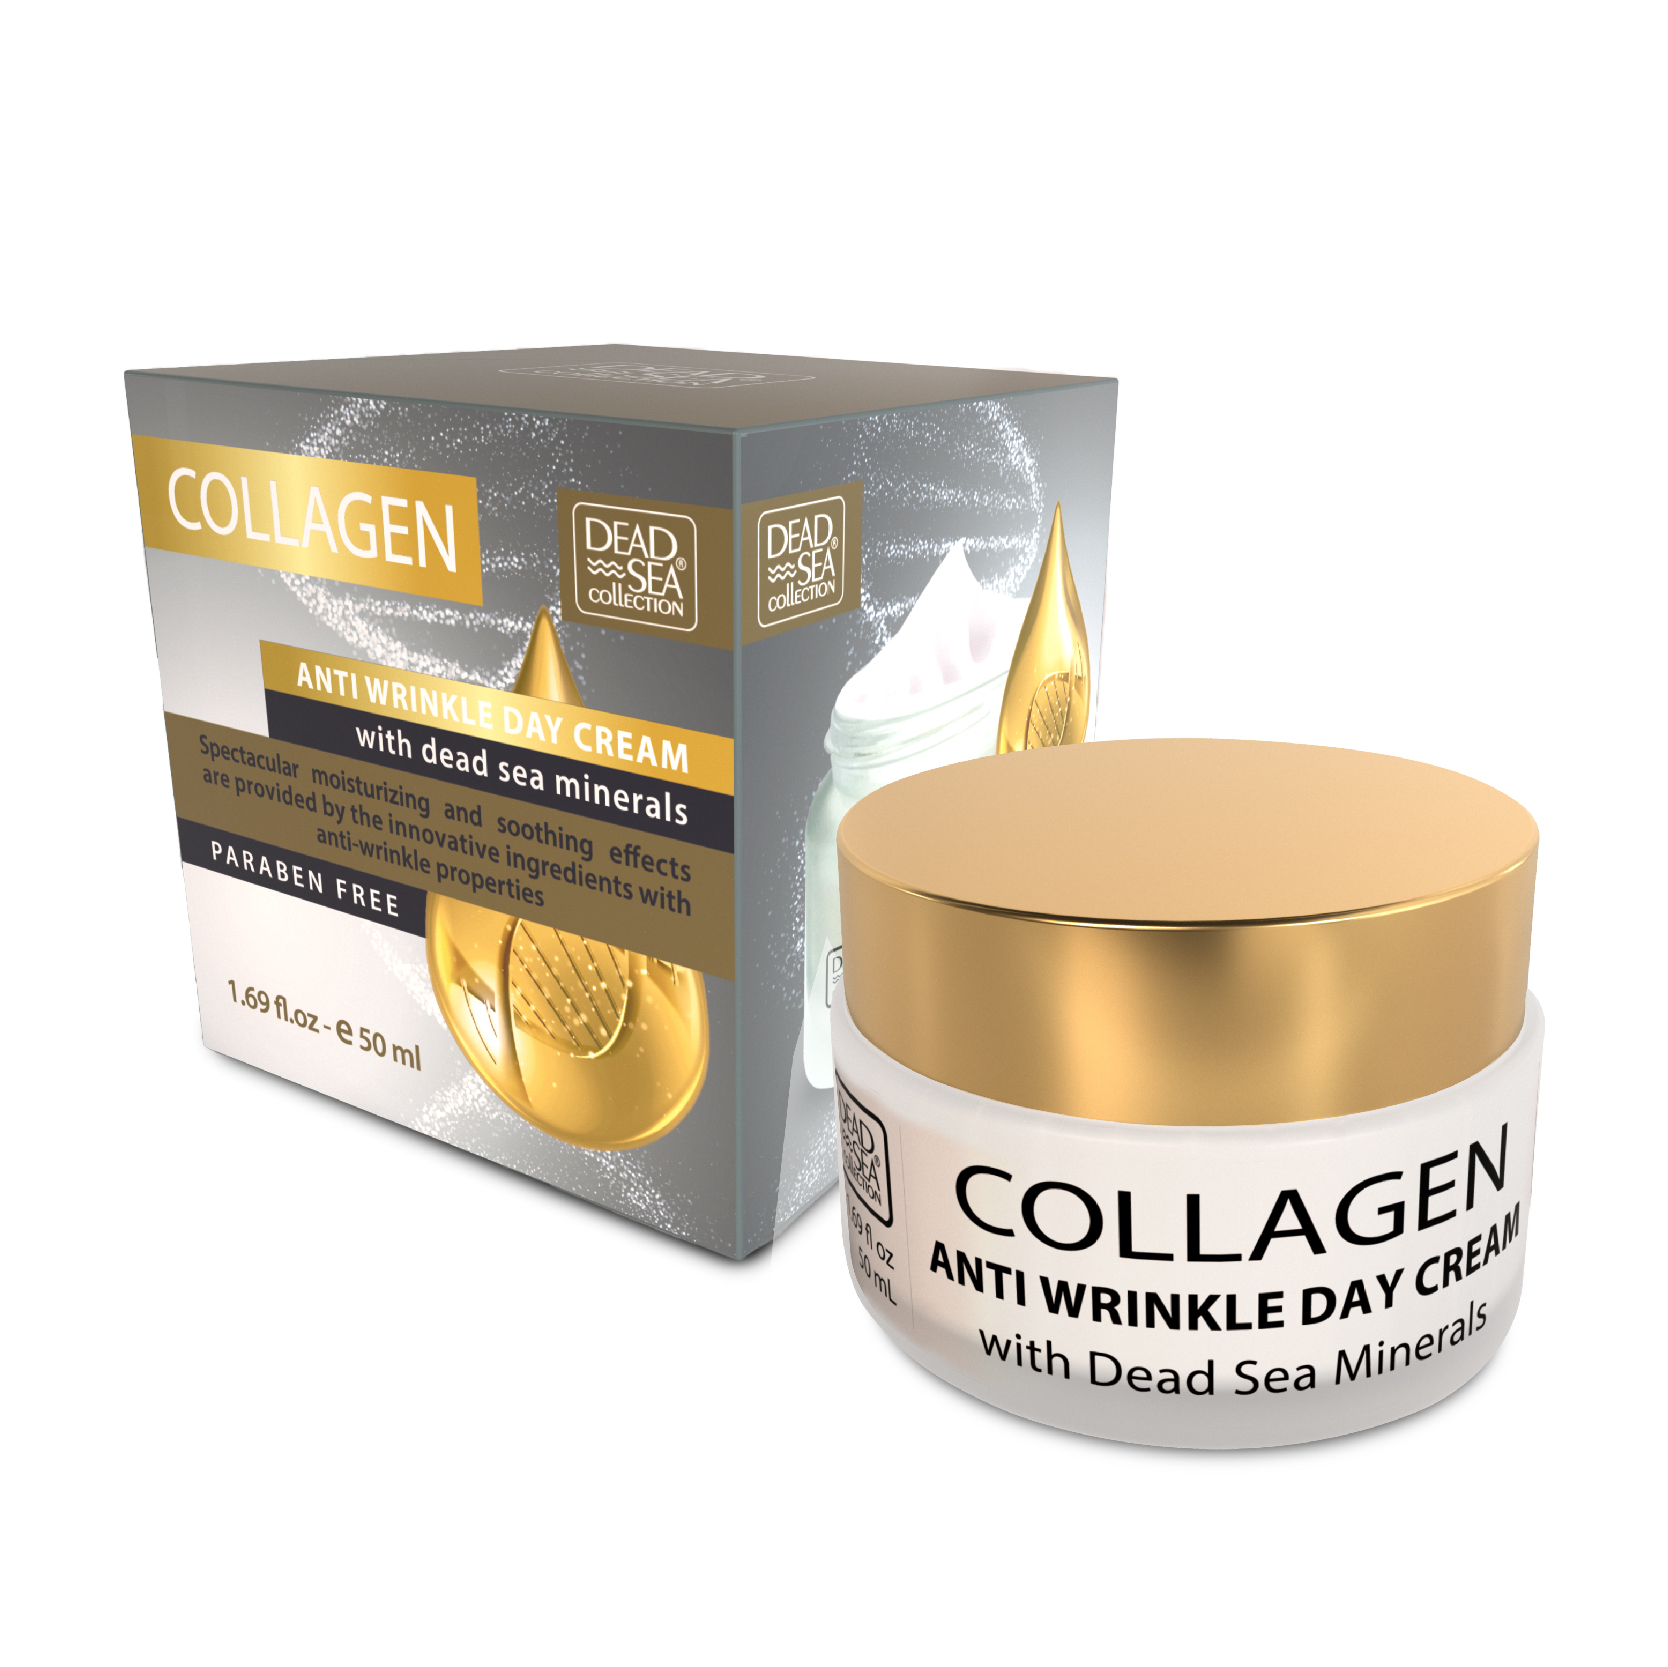 Collagen Anti-Wrinkle Day Cream - Dead Sea Collection